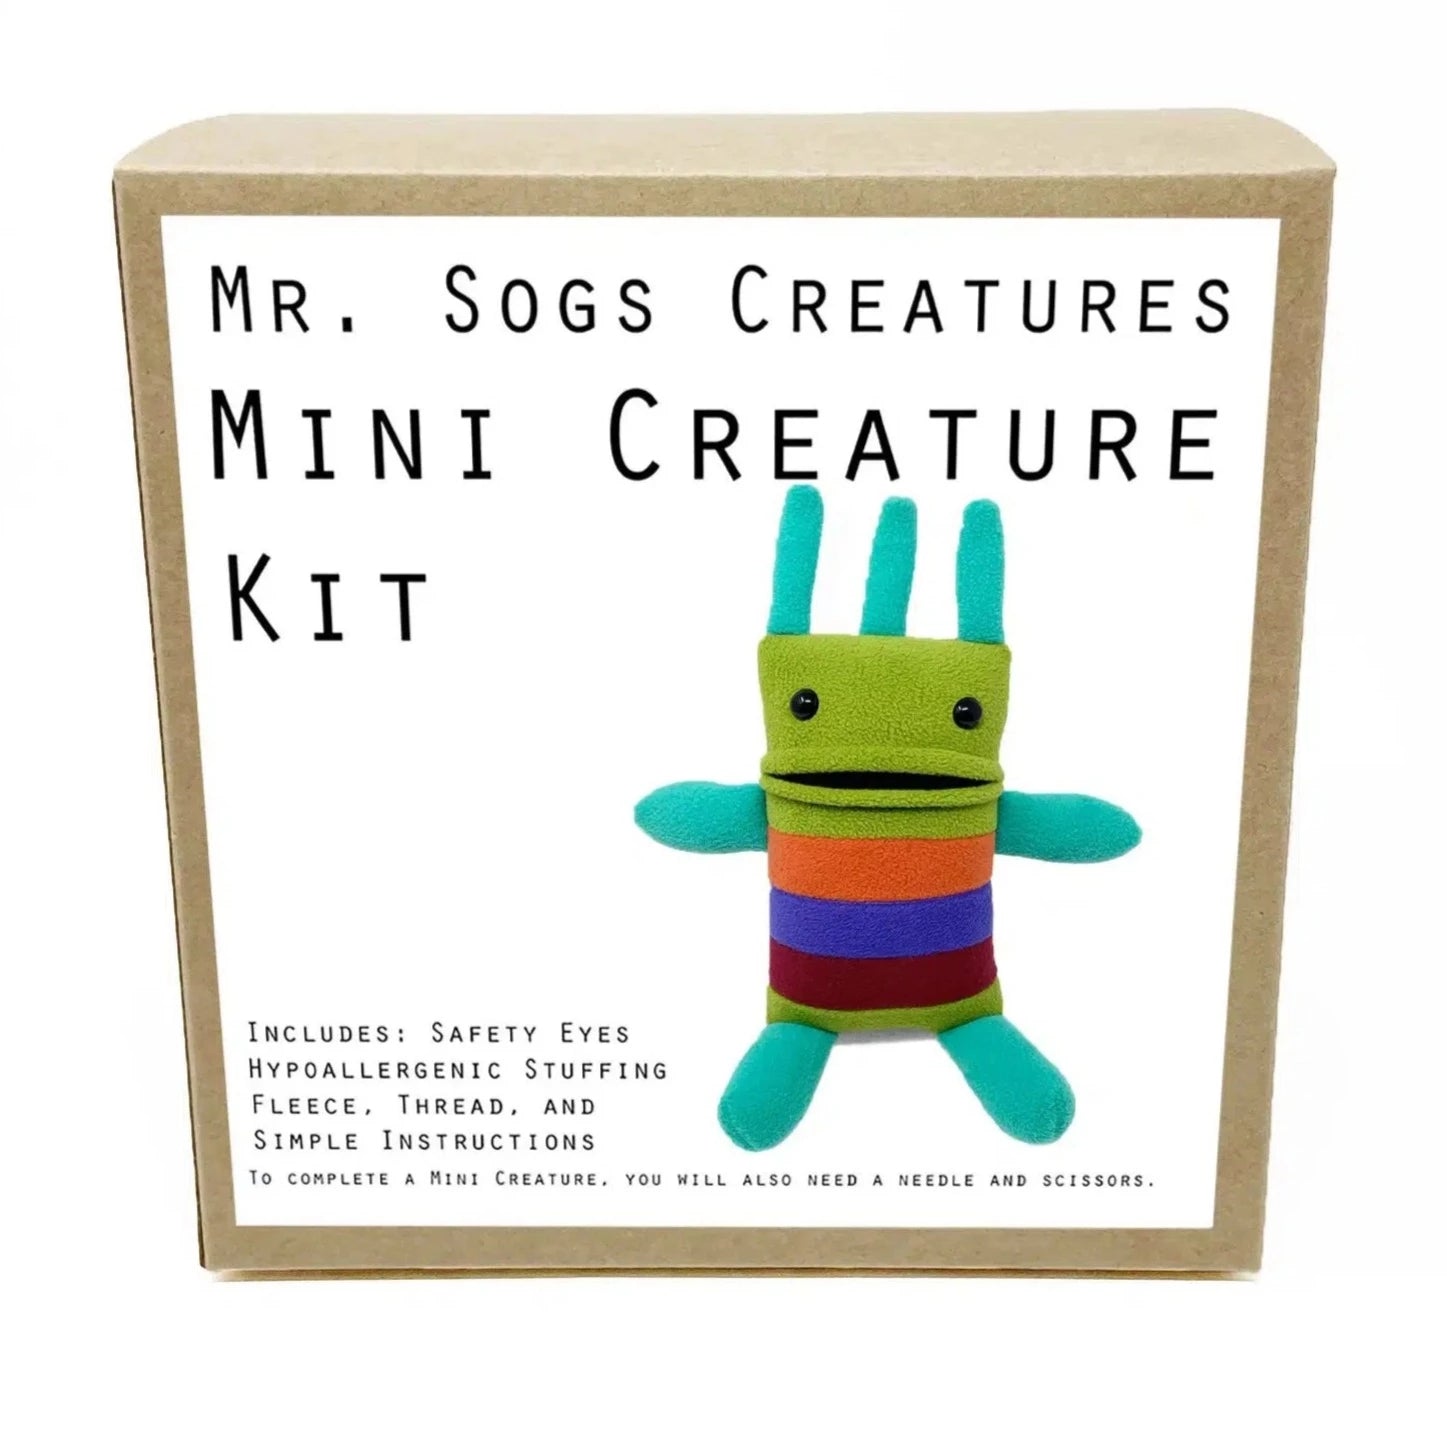 Mr. Sogs Creatures-Mini Creature Kit - Green-sewing kit-gather here online